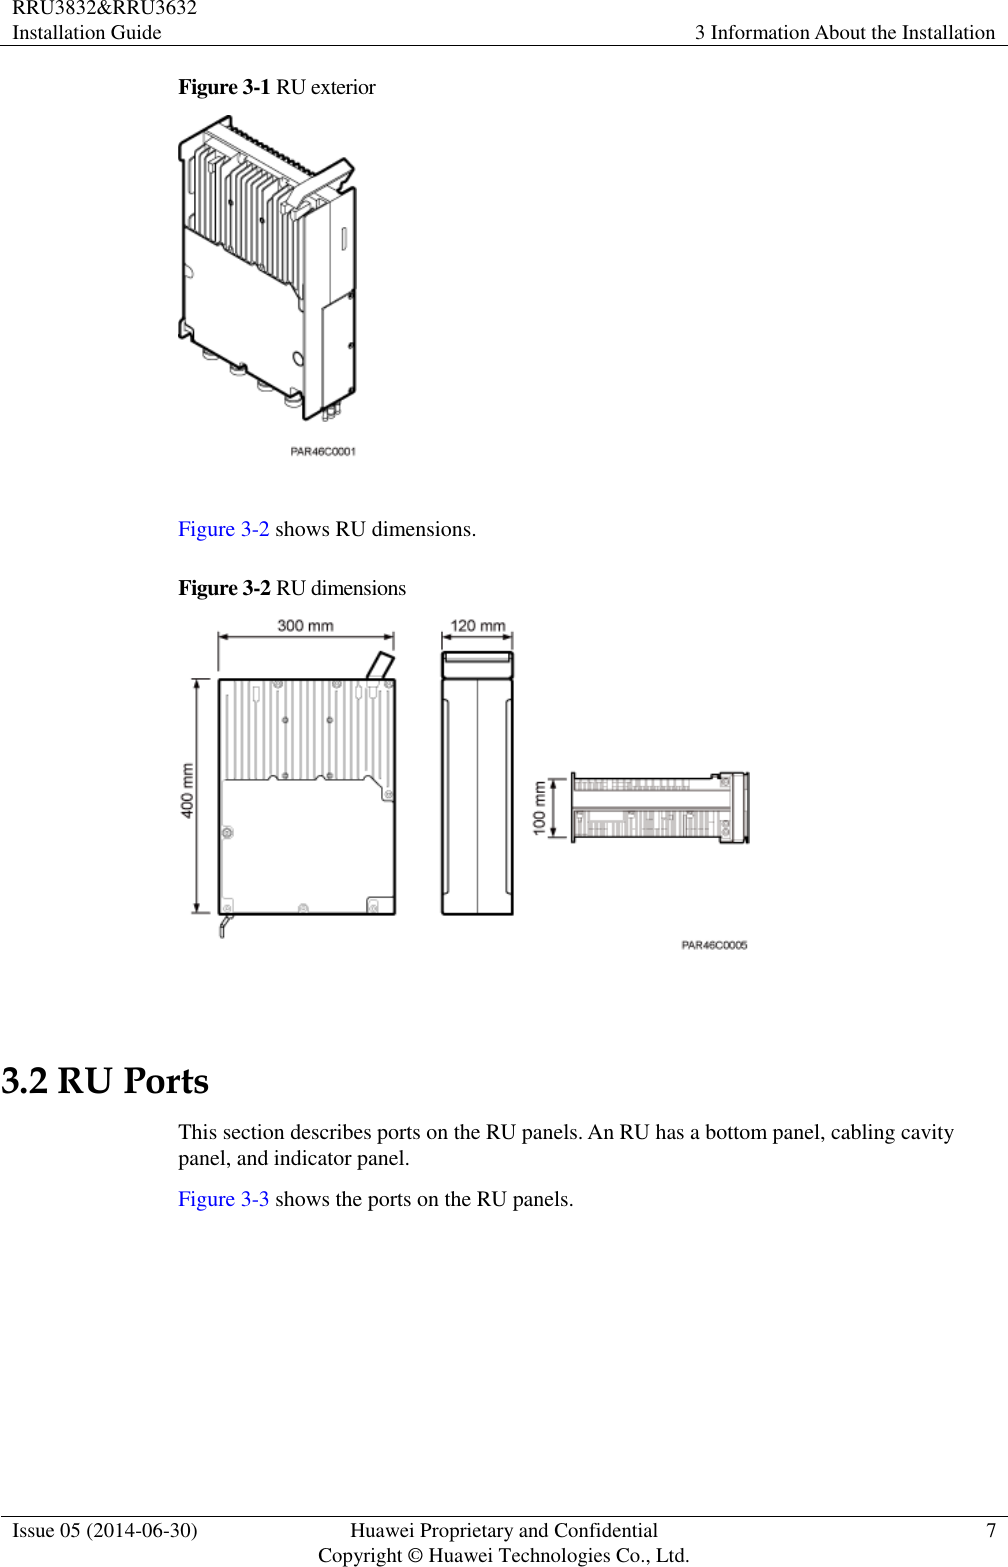 RRU3832&amp;RRU3632 Installation Guide 3 Information About the Installation  Issue 05 (2014-06-30) Huawei Proprietary and Confidential                                     Copyright © Huawei Technologies Co., Ltd. 7  Figure 3-1 RU exterior   Figure 3-2 shows RU dimensions. Figure 3-2  RU dimensions   3.2 RU Ports This section describes ports on the RU panels. An RU has a bottom panel, cabling cavity panel, and indicator panel. Figure 3-3 shows the ports on the RU panels. 